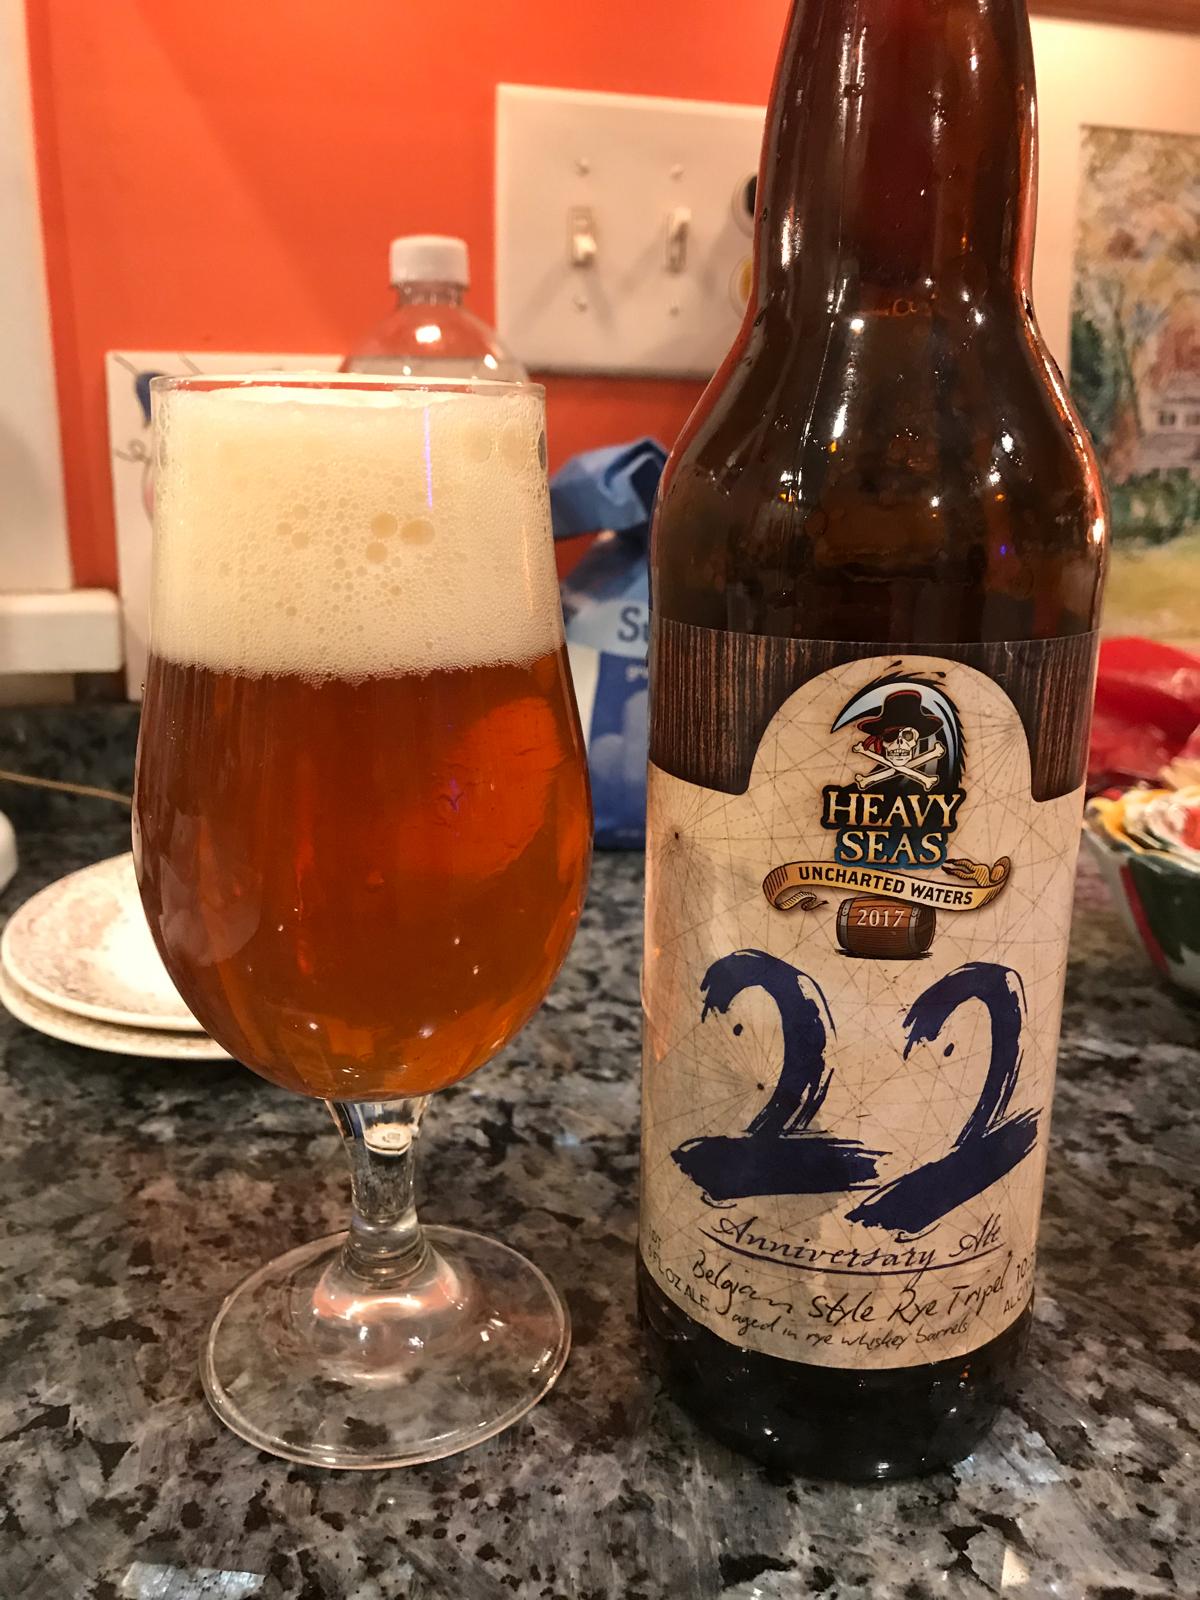 22nd Anniversary Ale (Uncharted Waters 2017)